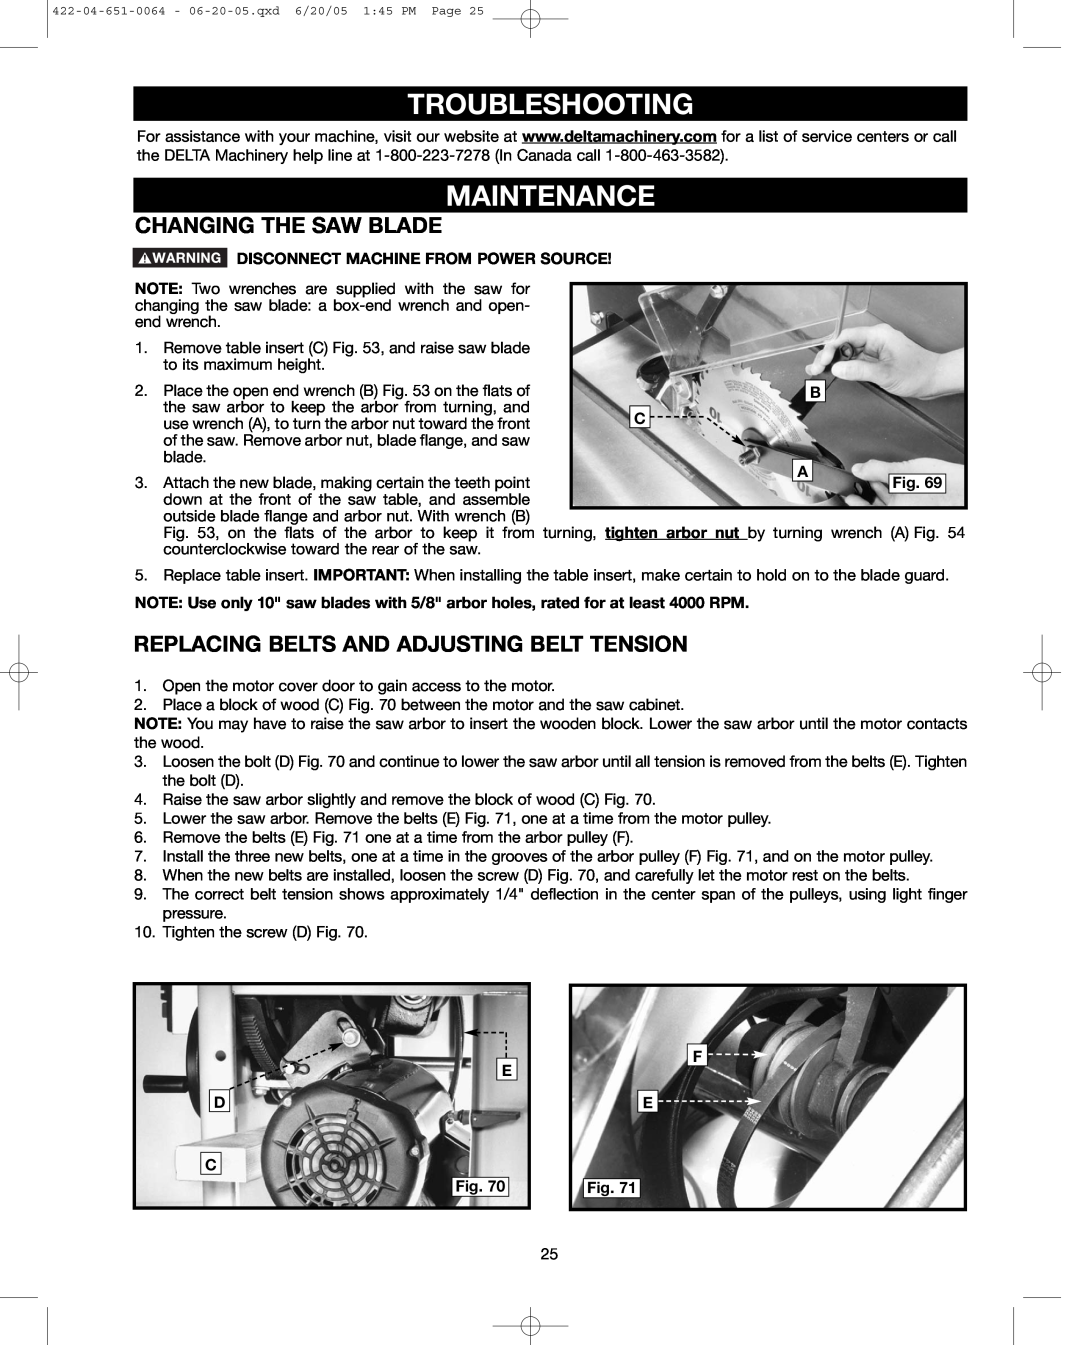 Delta 34-806, 34-814 Troubleshooting, Maintenance, Changing The Saw Blade, Replacing Belts And Adjusting Belt Tension 